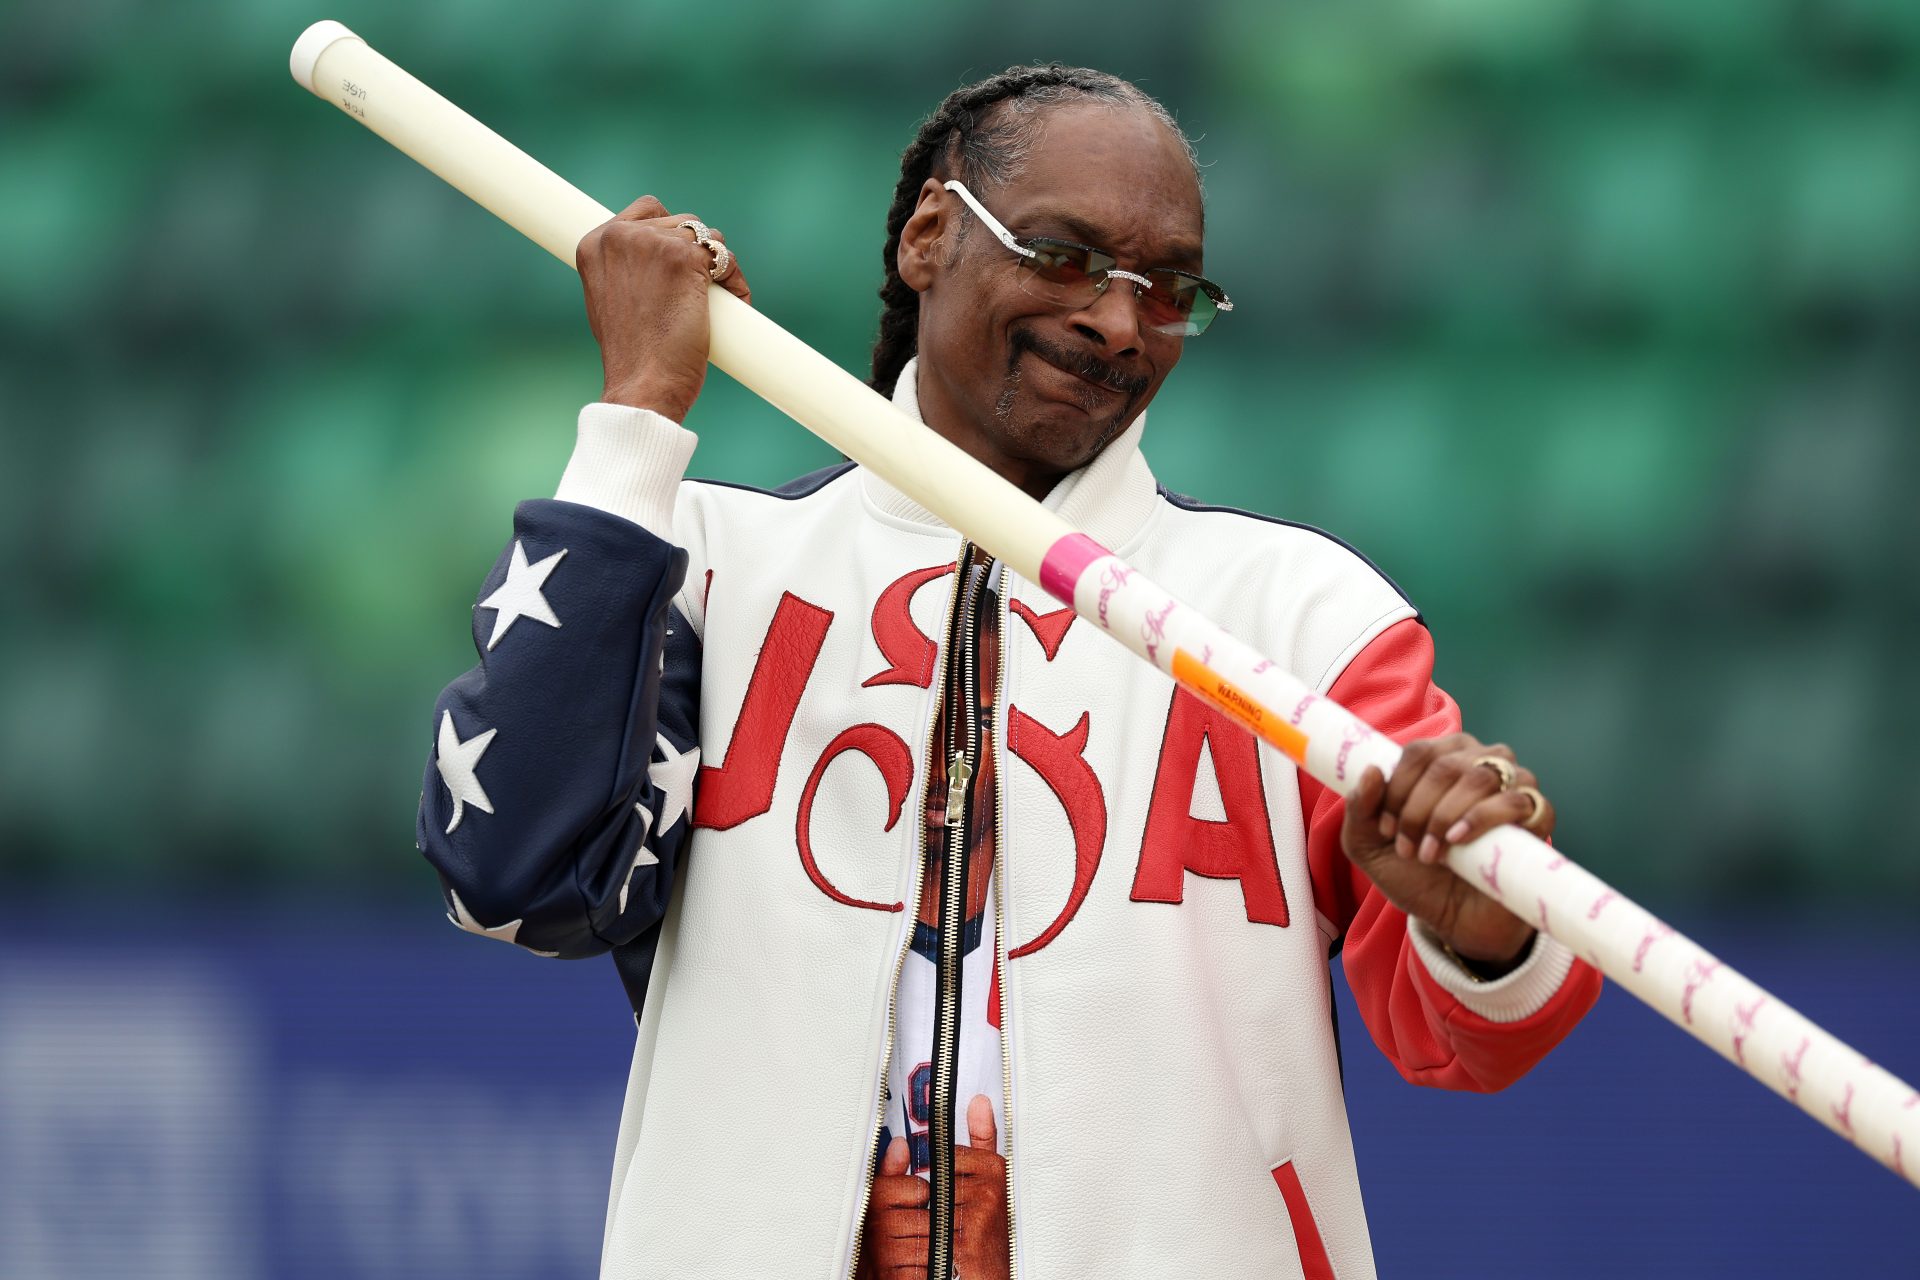 Snoop Dogg laughs on social media about his Olympic Trials commentary skills.jpg